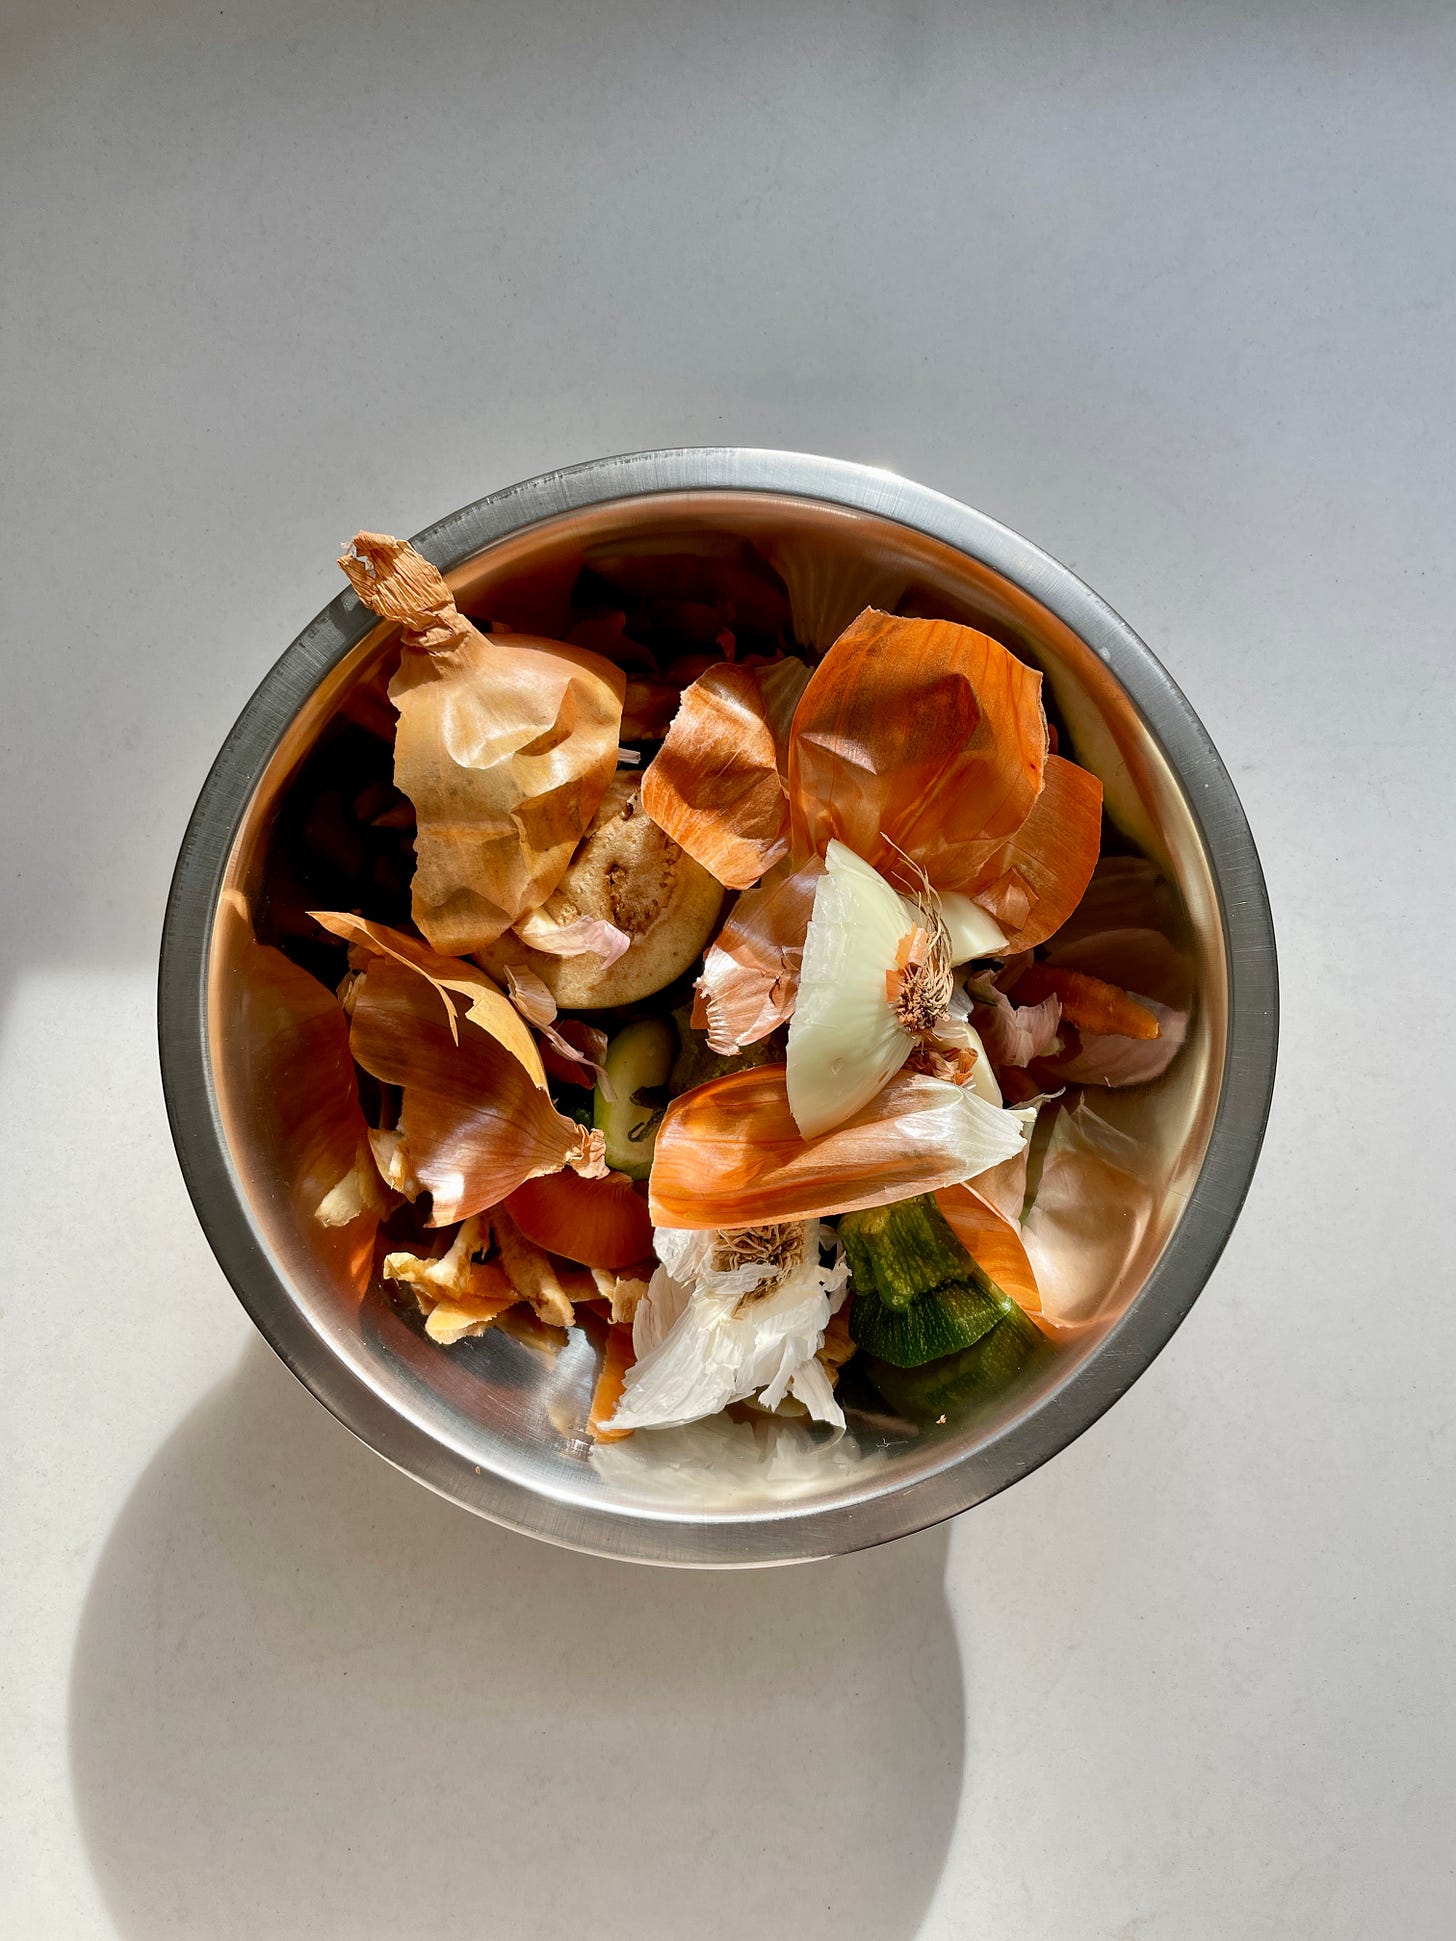 A top-down view of a silver bowl full of vegetable scraps and peelings.